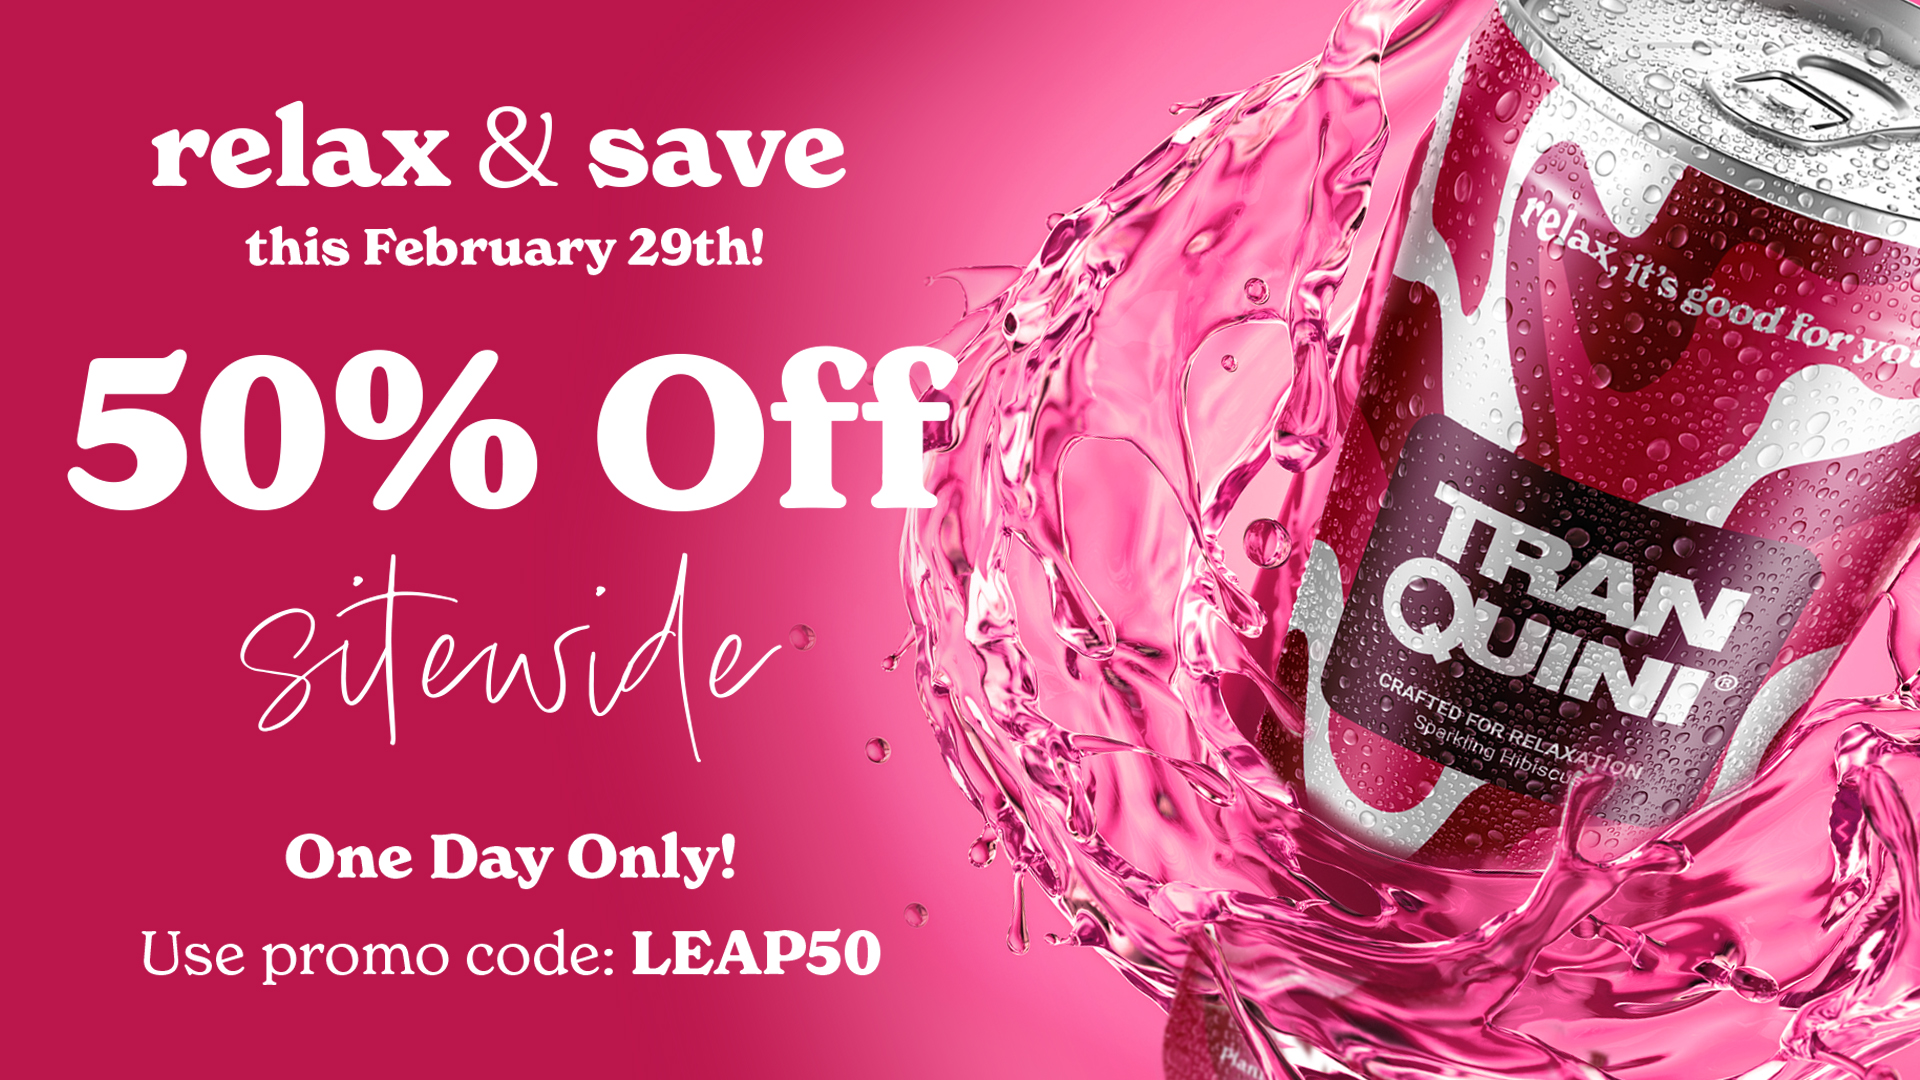 Leap Day Special